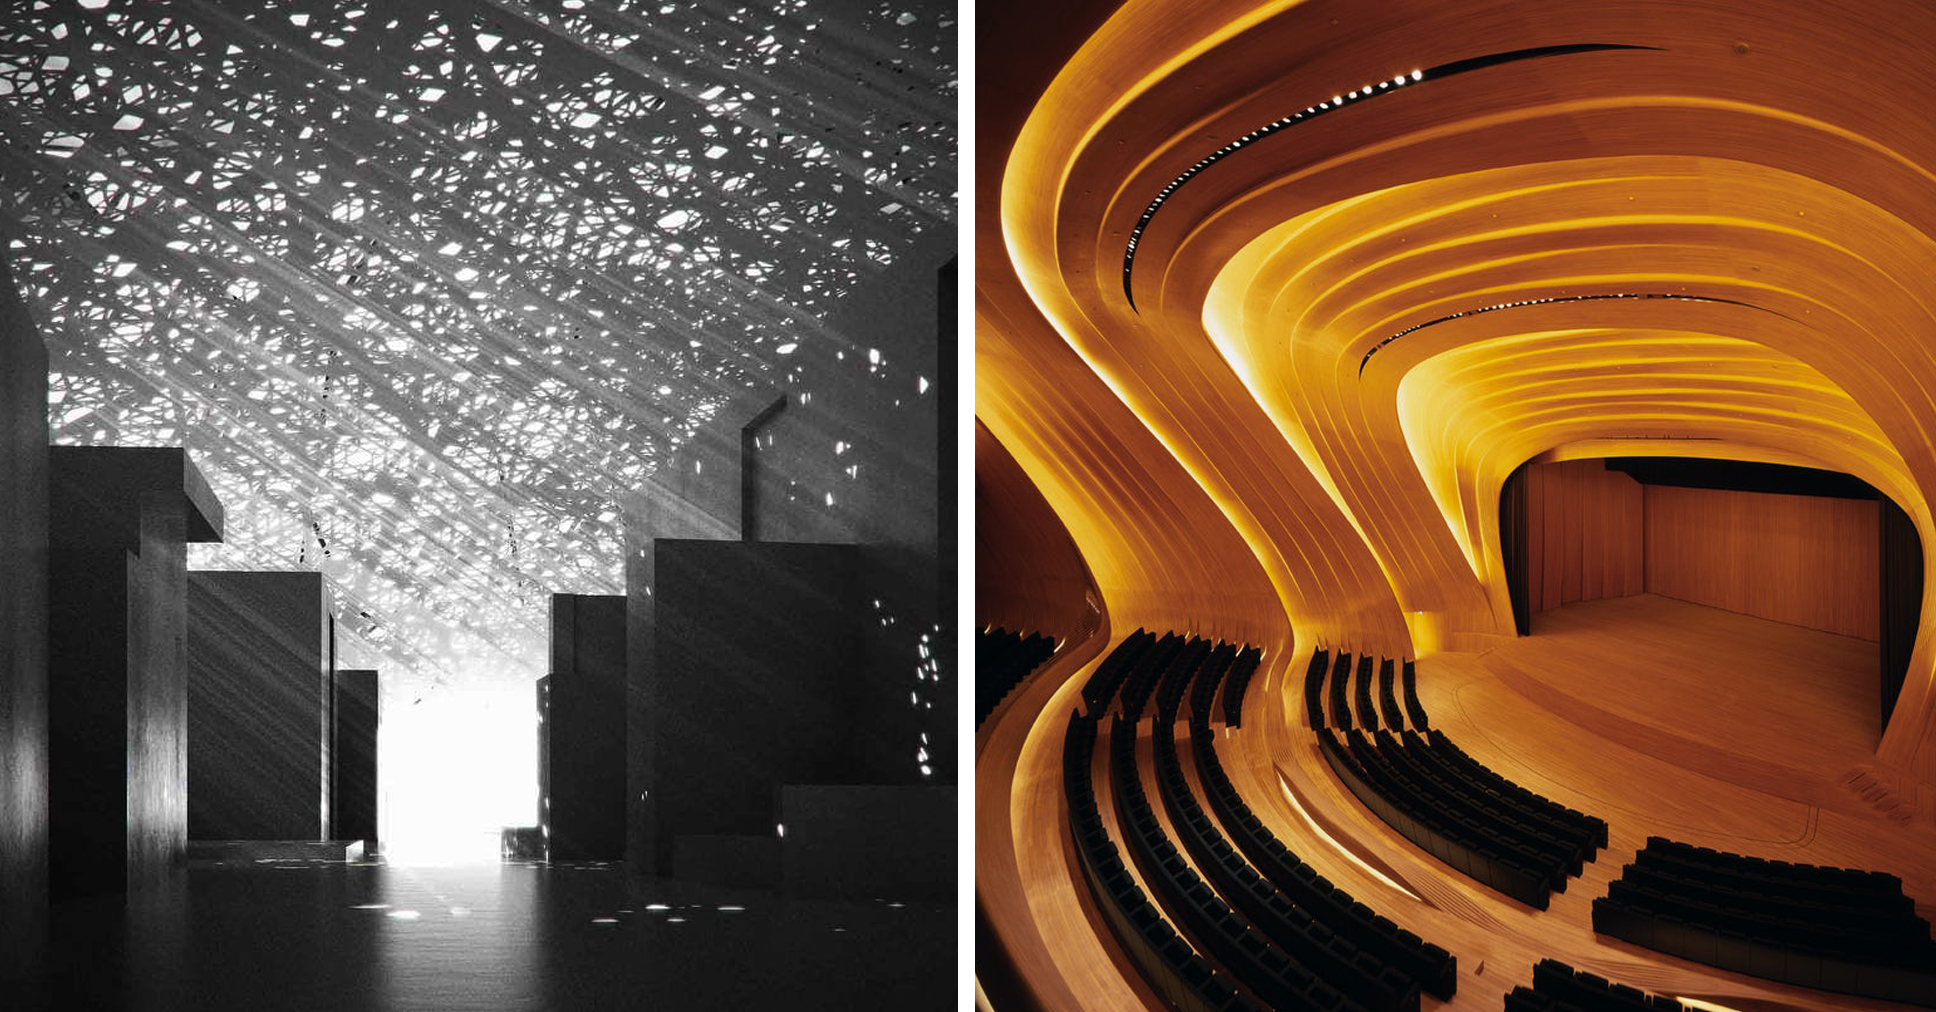 En trofast analog Flåde 7 Iconic Architecture Firms Harnessing the Power of Light — Inside and Out  - Architizer Journal %